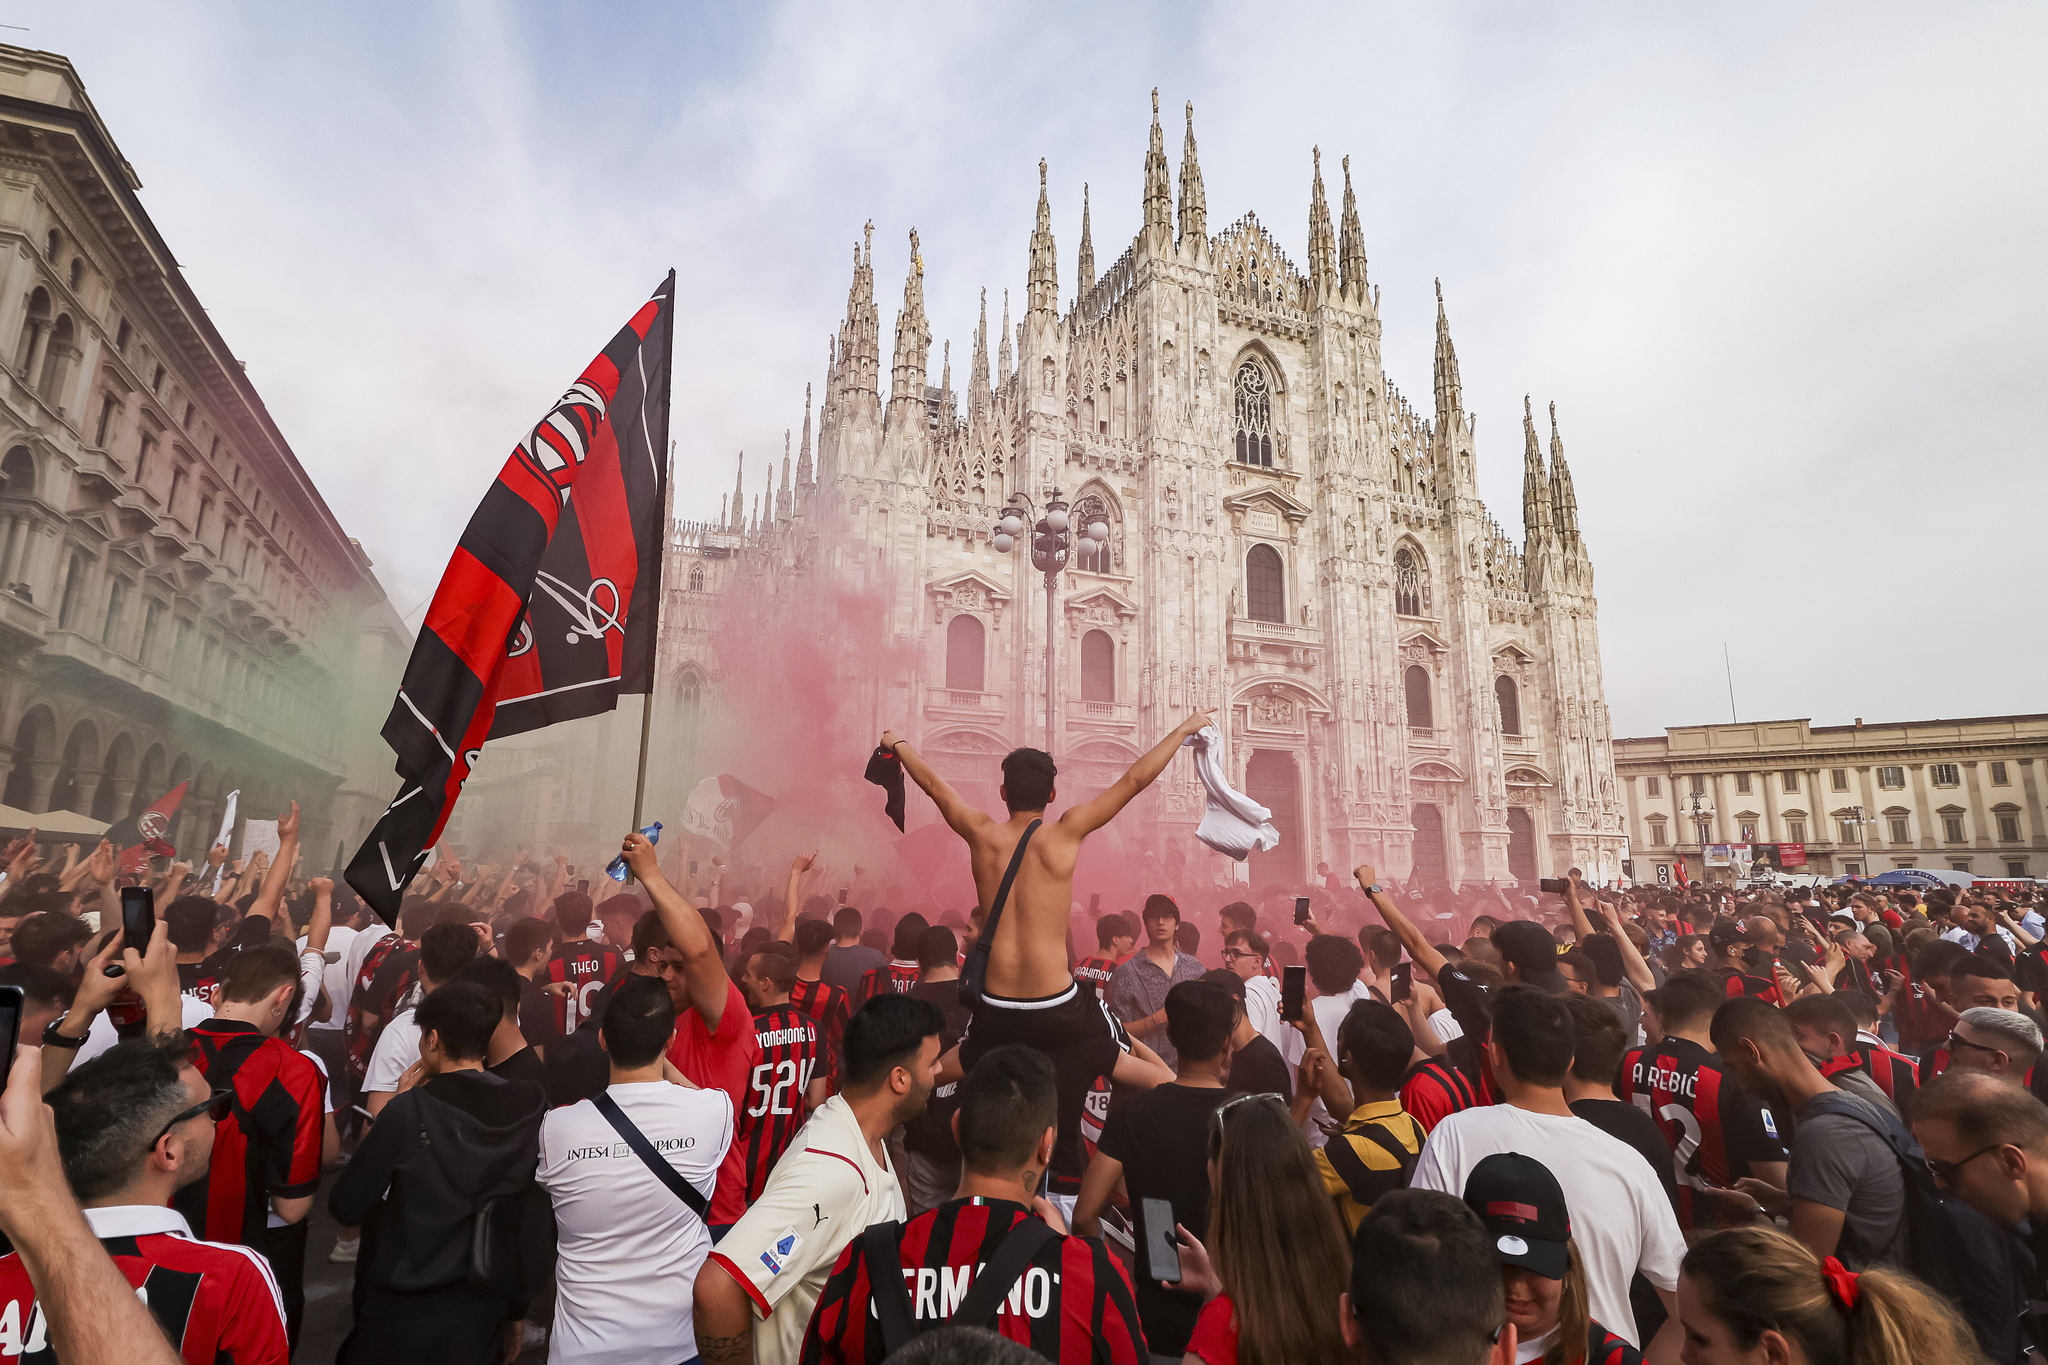 AC  lt;HIT gt;Milan lt;/HIT gt; fans gather in Piazza Duomo square, with the gothic cathedral in the background, during a Serie A soccer match between Sassuolo and AC  lt;HIT gt;Milan lt;/HIT gt;, being played in Reggio Emilia, in  lt;HIT gt;Milan lt;/HIT gt;, Italy, Sunday, May 22, 2022. (Alessandro Bremec/LaPresse via AP)